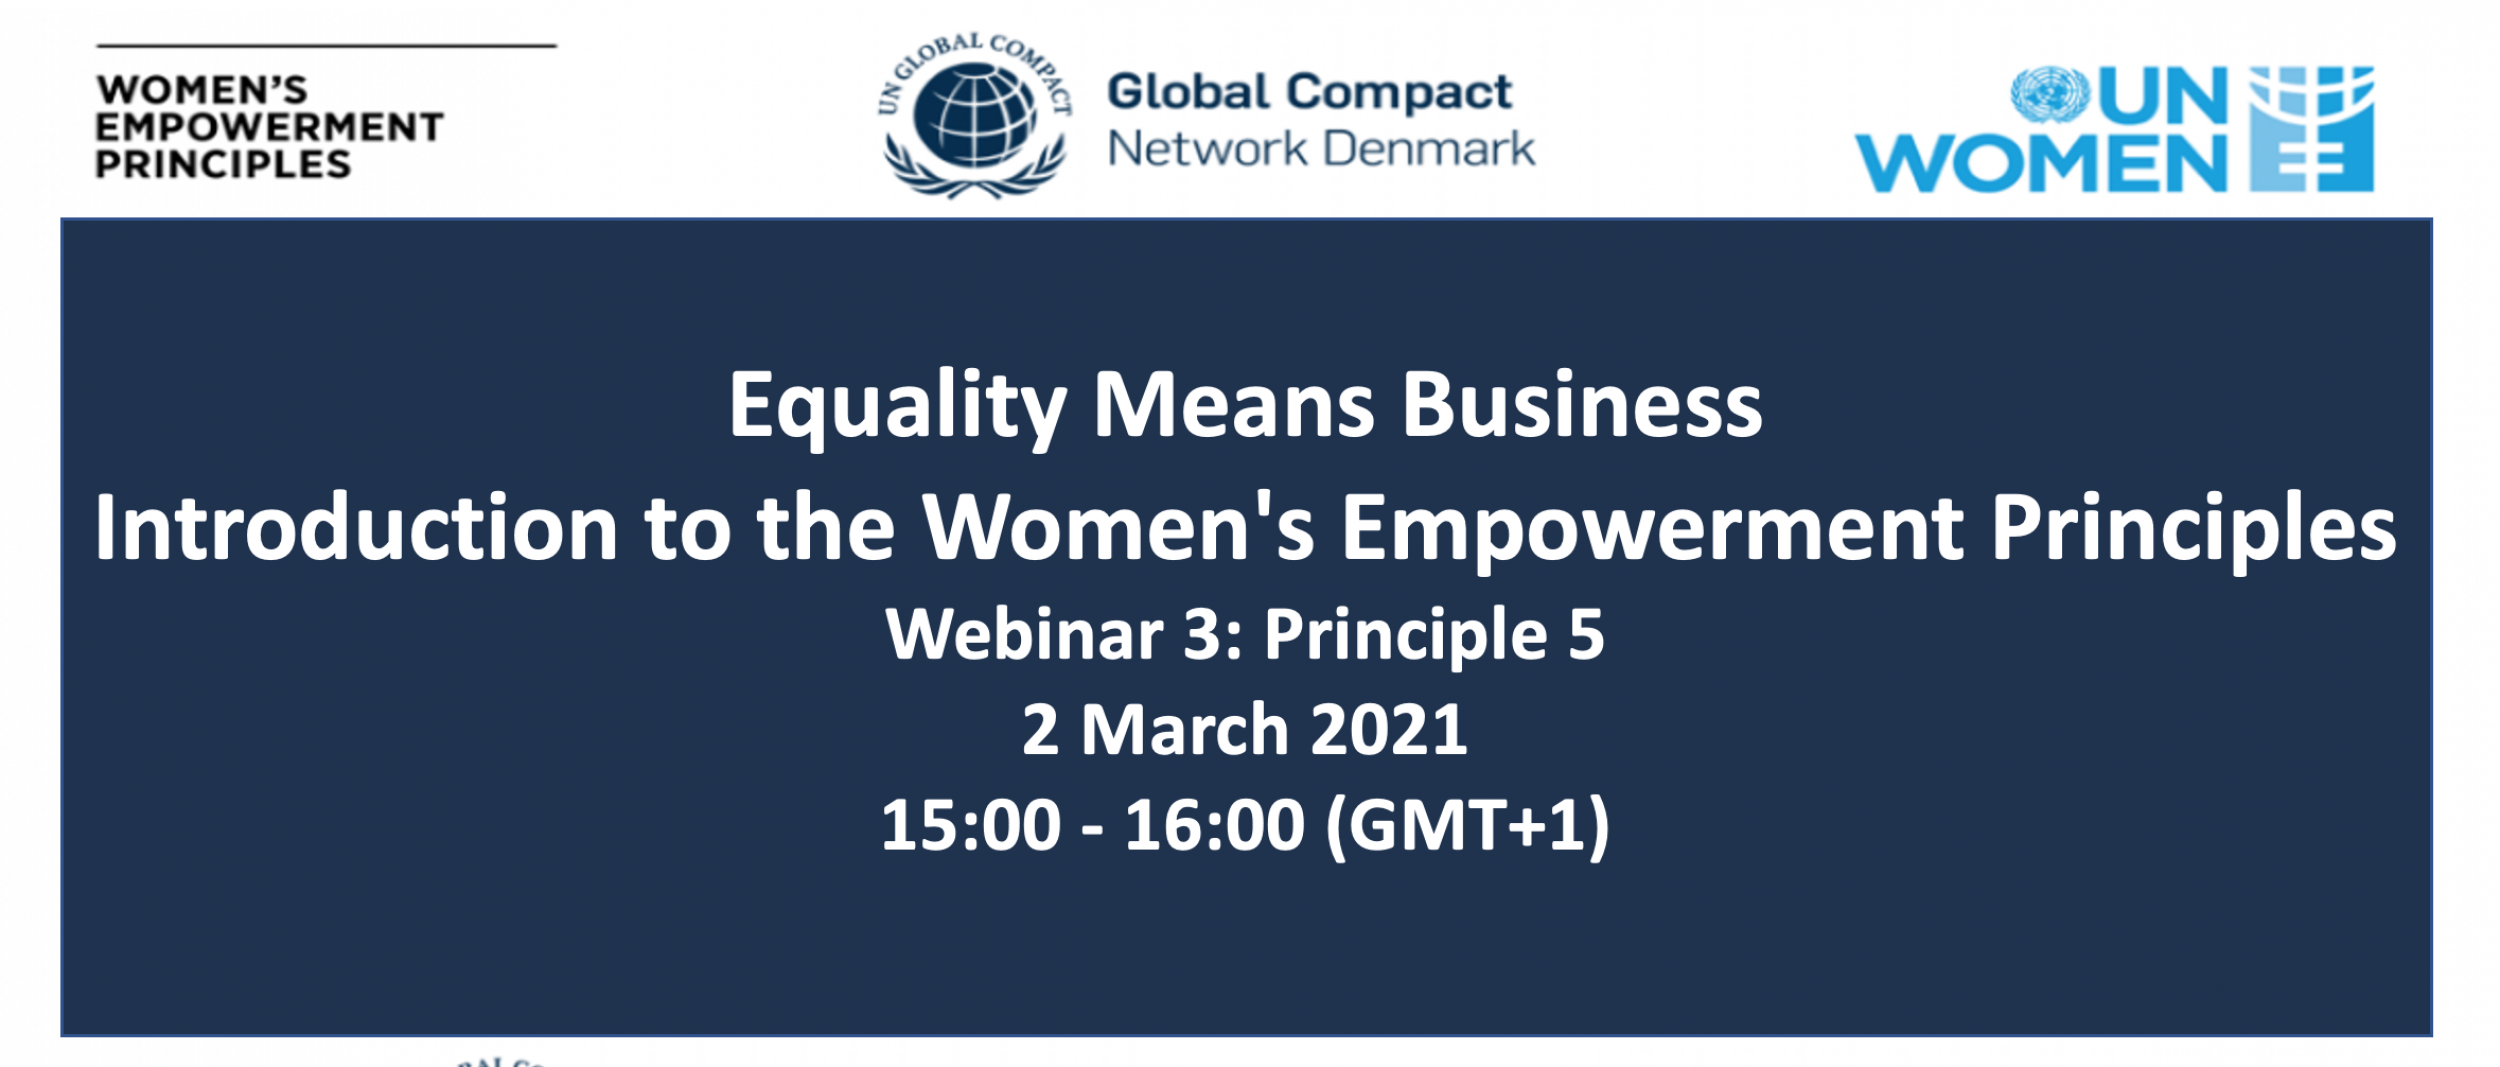 Equality Means Business – Introduction to Women's Empowerment Principle 5 